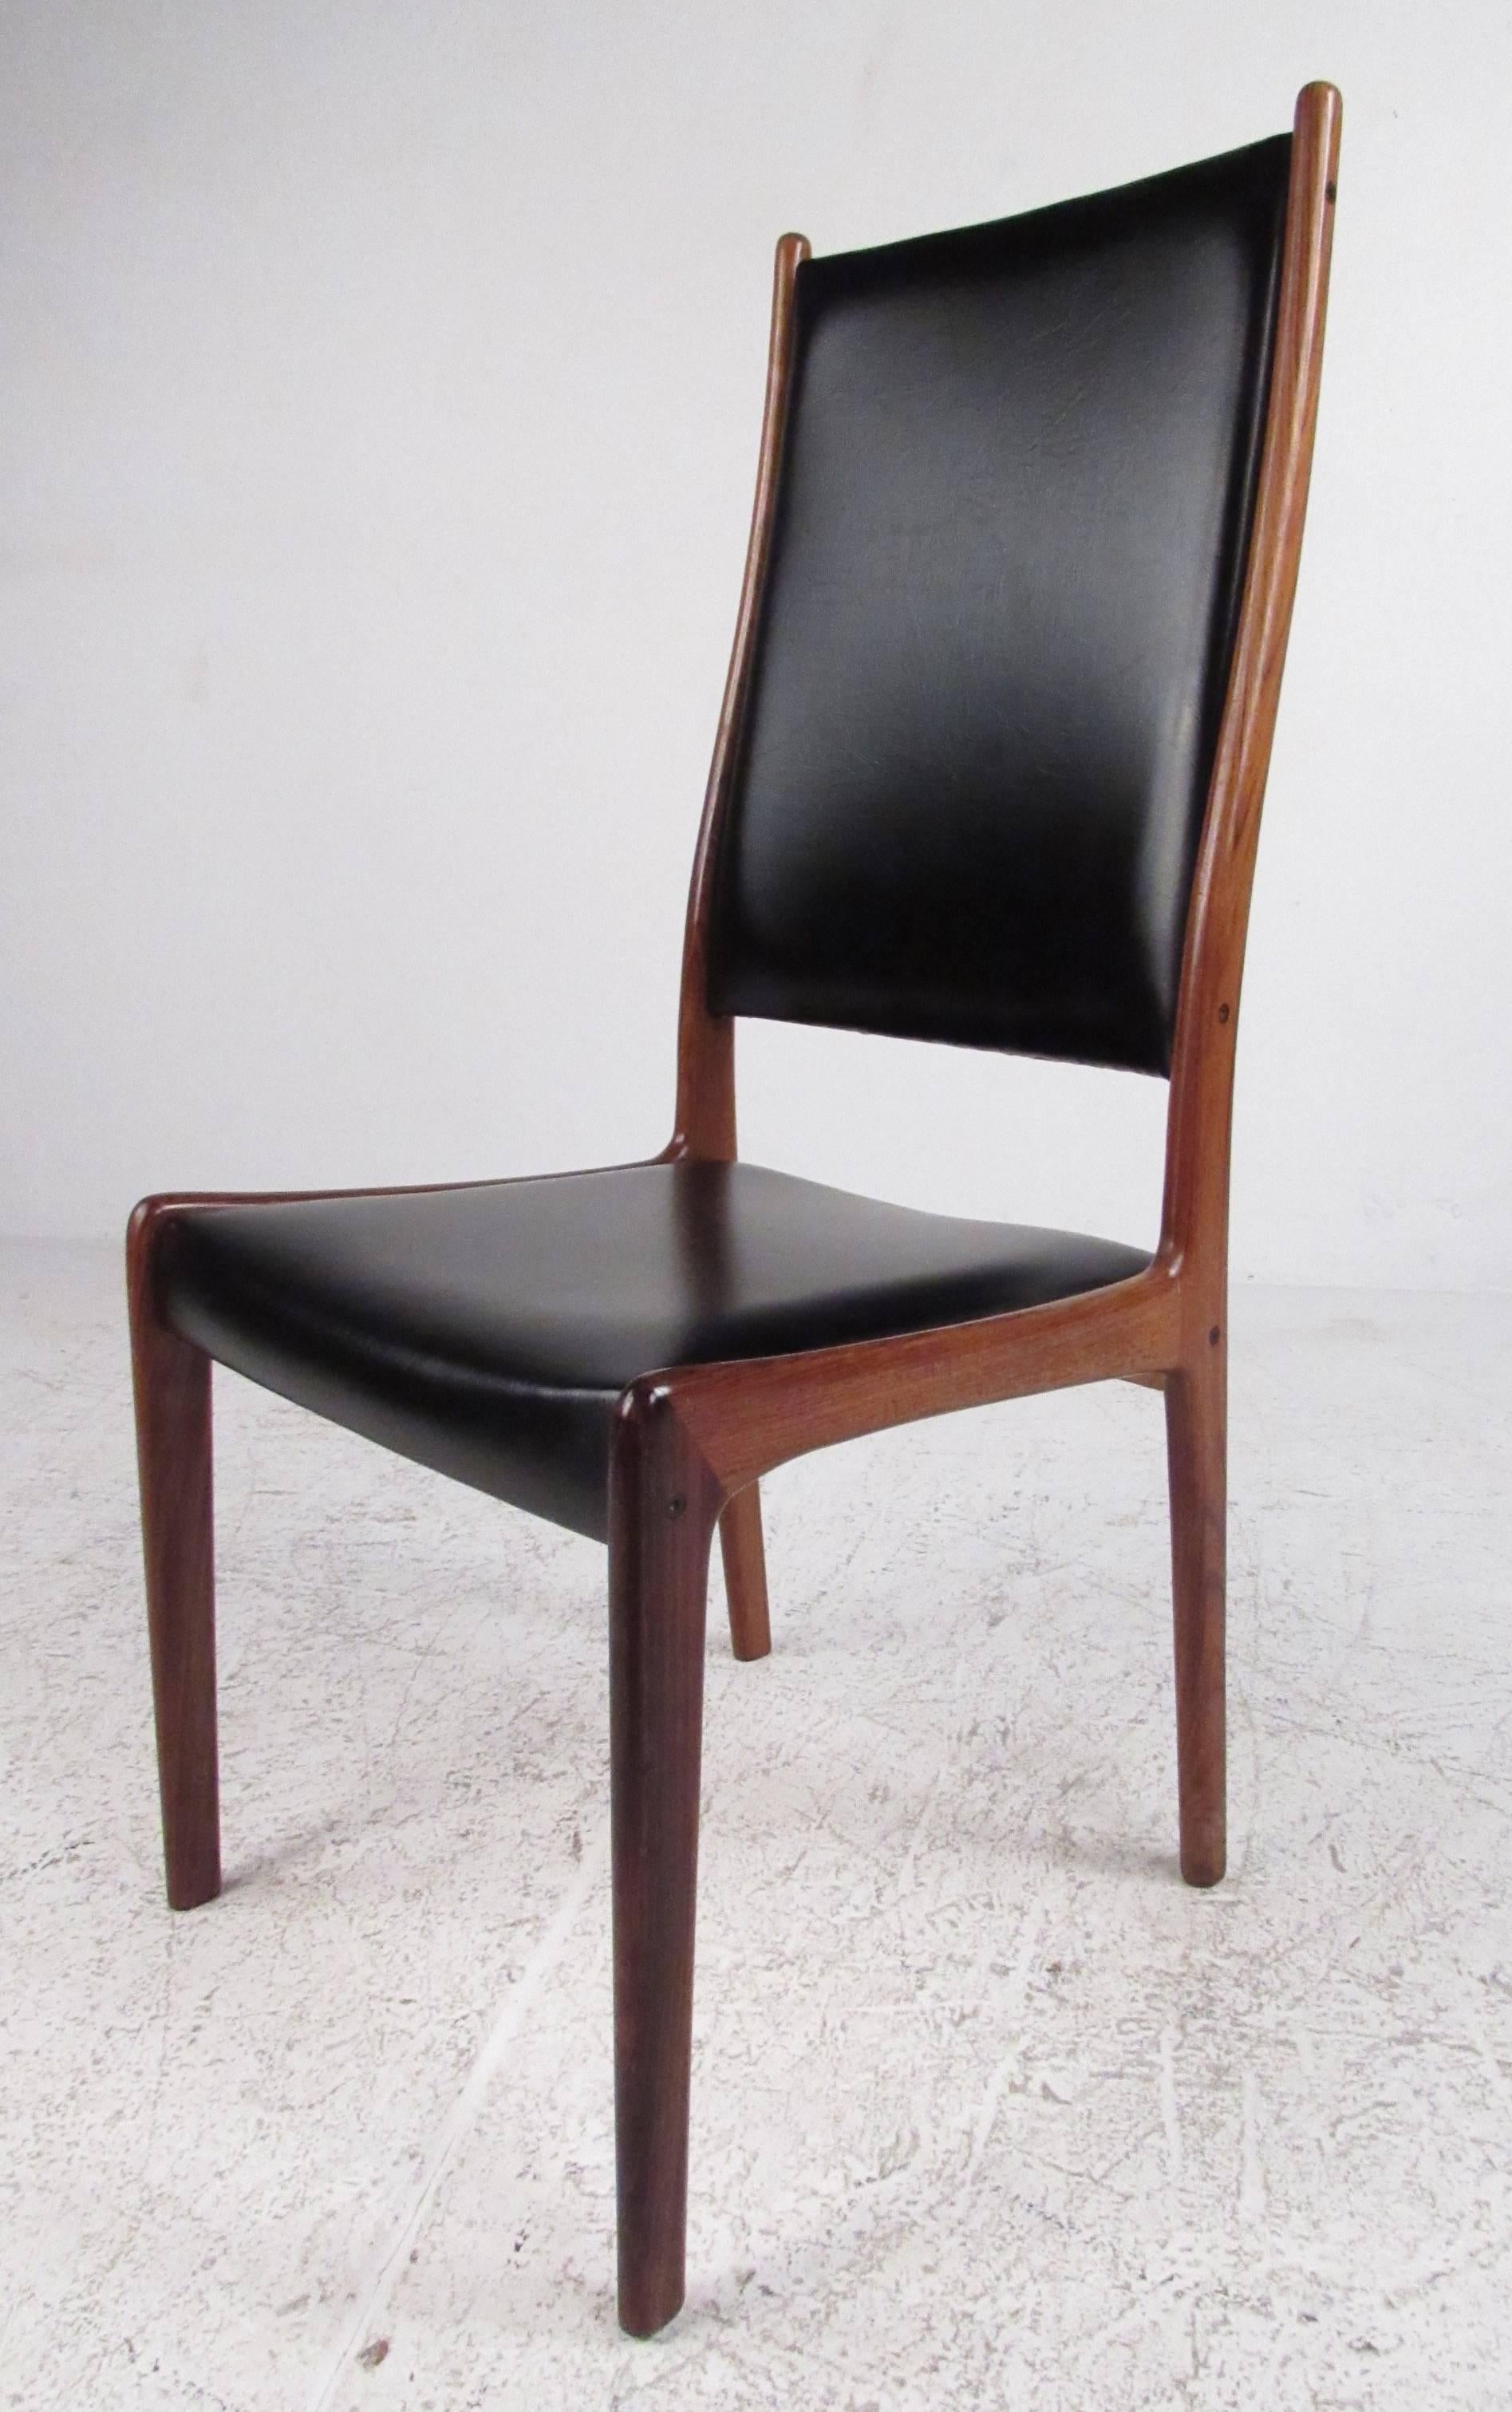 Set of six rosewood with black faux leather upholstery dining chairs by noted furniture designer Johannes Andersen. Beautifully detailed solid wood frames with dovetail joints and Danish Makers Control mark on each. Please confirm item location (NY